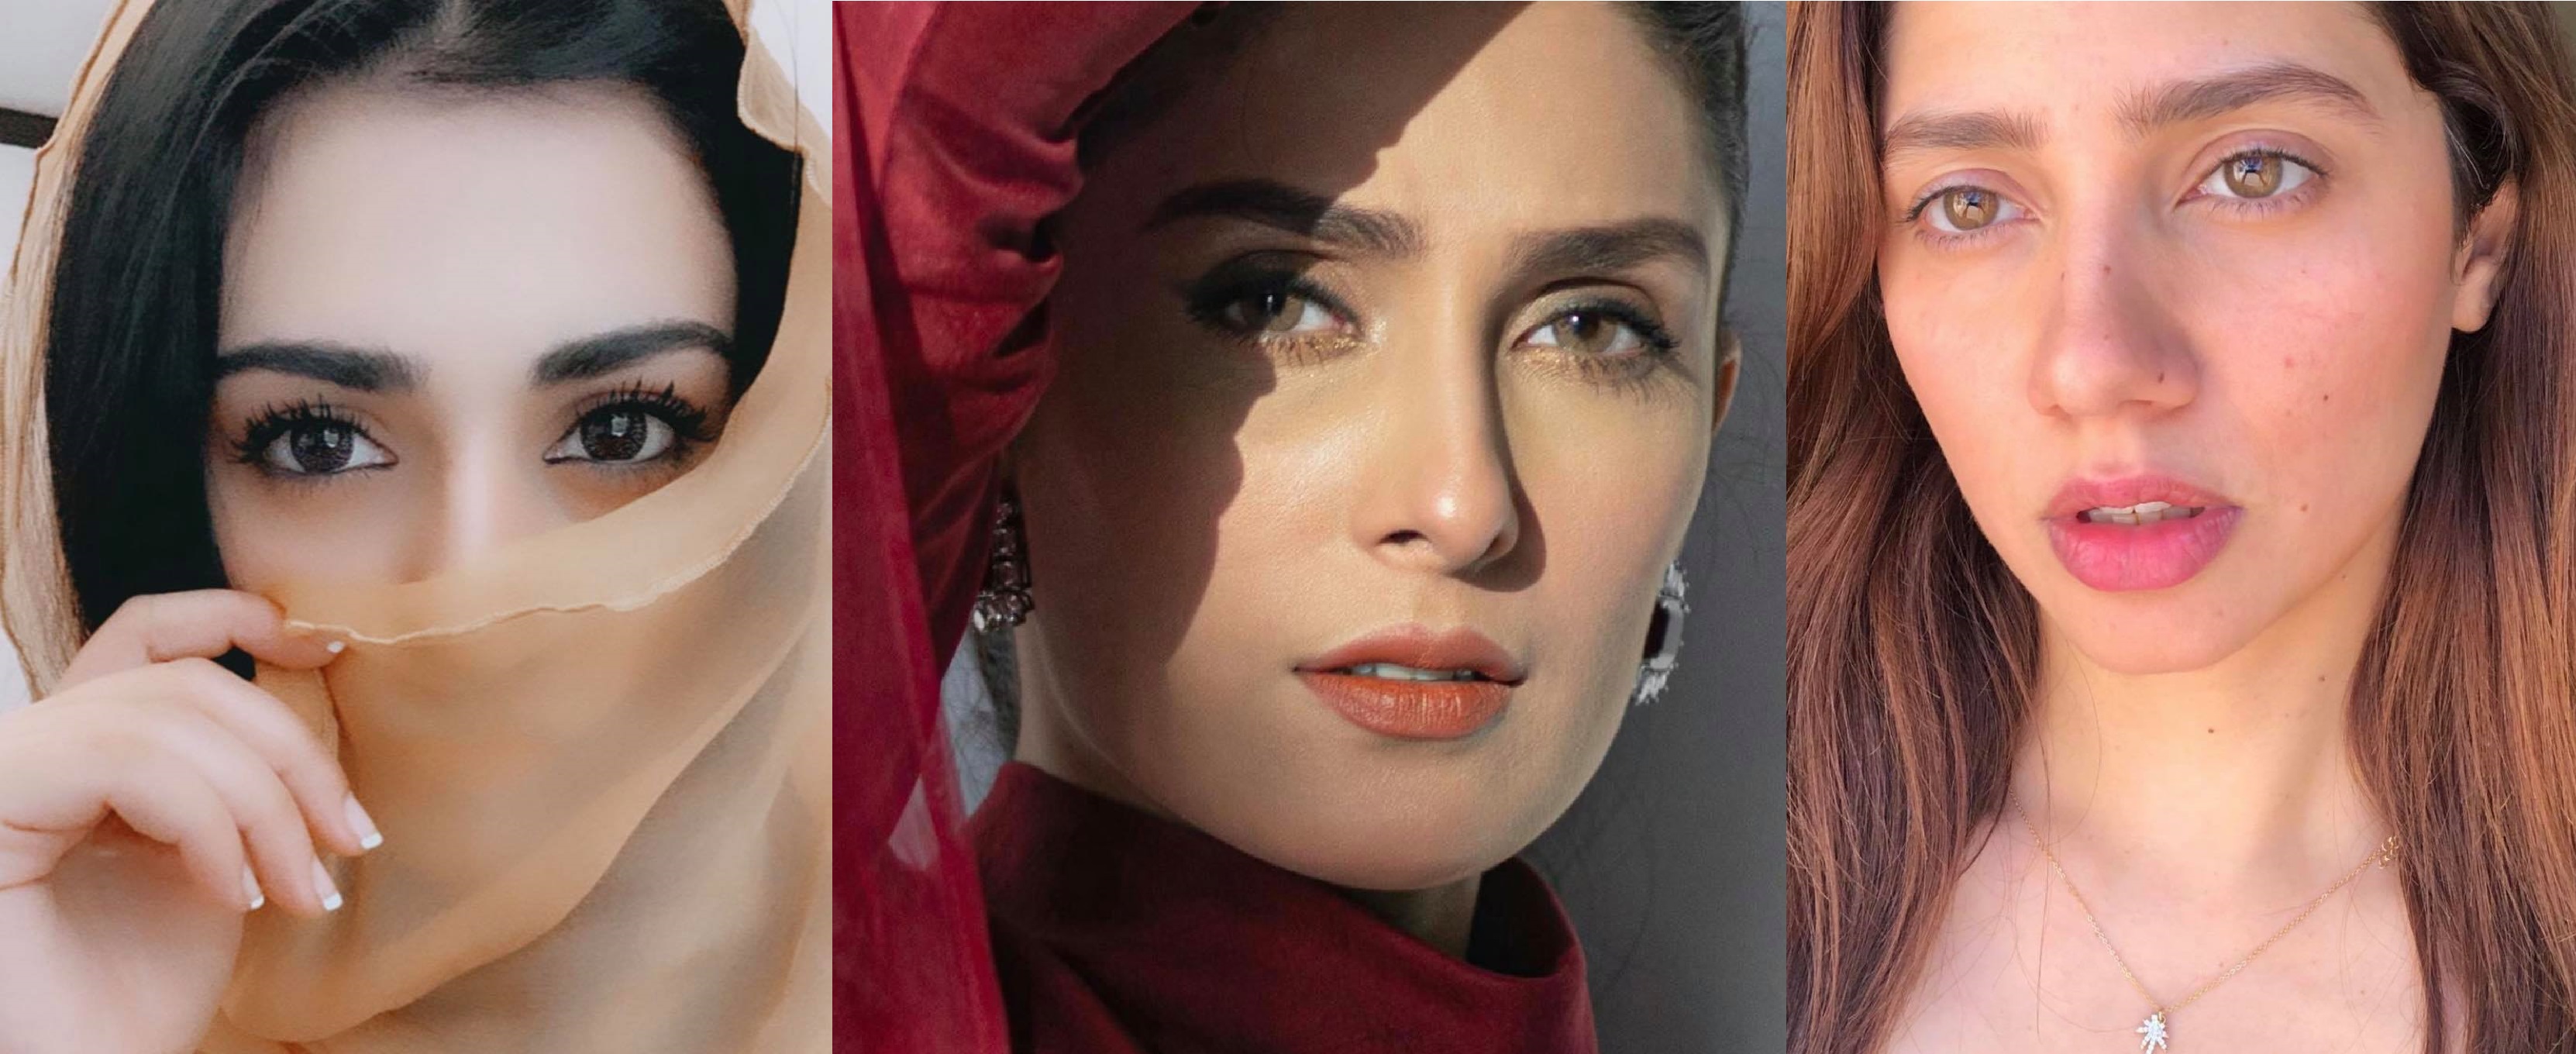 13 Pakistani Actresses with the Most Beautiful Eyes Pictures. 